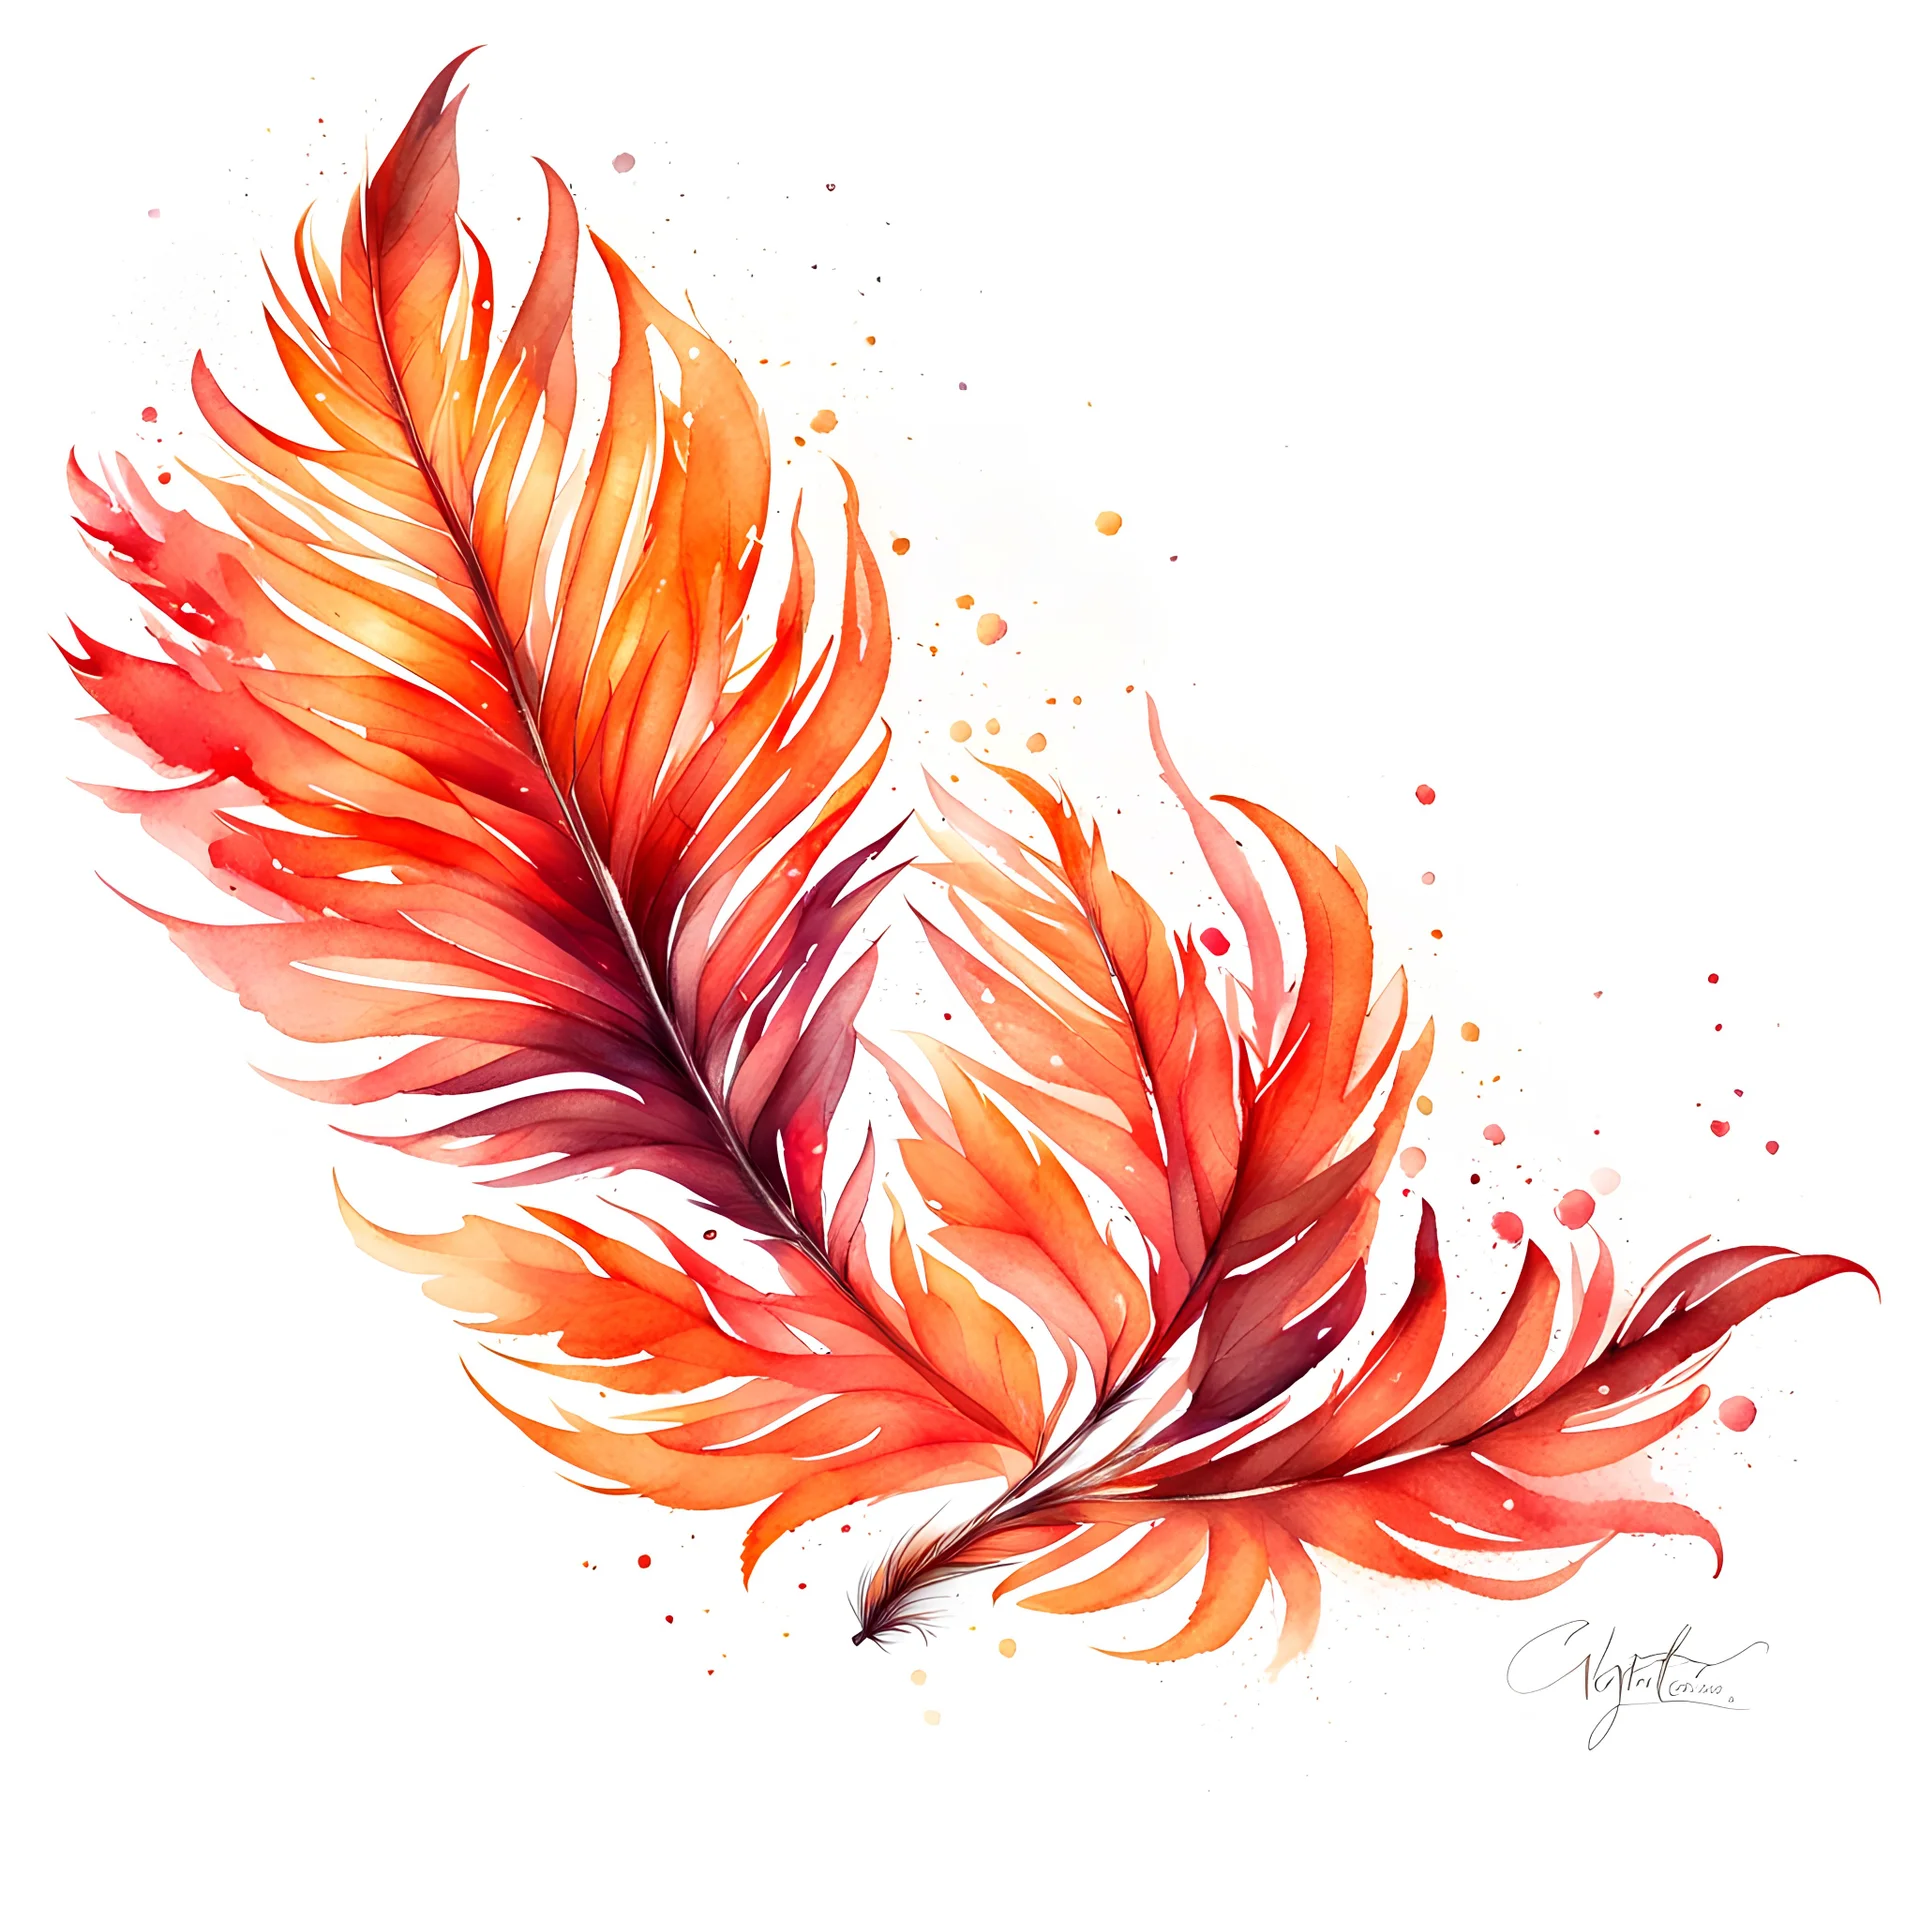 watercolor drawing of a firebird feather on a white background, Trending on Artstation, {creative commons}, fanart, AIart, {Woolitize}, by Charlie Bowater, Illustration, Color Grading, Filmic, Nikon D750, Brenizer Method, Perspective, Depth of Field, Field of View, F/2.8, Lens Flare, Tonal Colors, 8K, Full-HD, ProPhoto RGB, Perfectionism, Rim Lighting, Natural Lighting, Soft Lighting, Acc